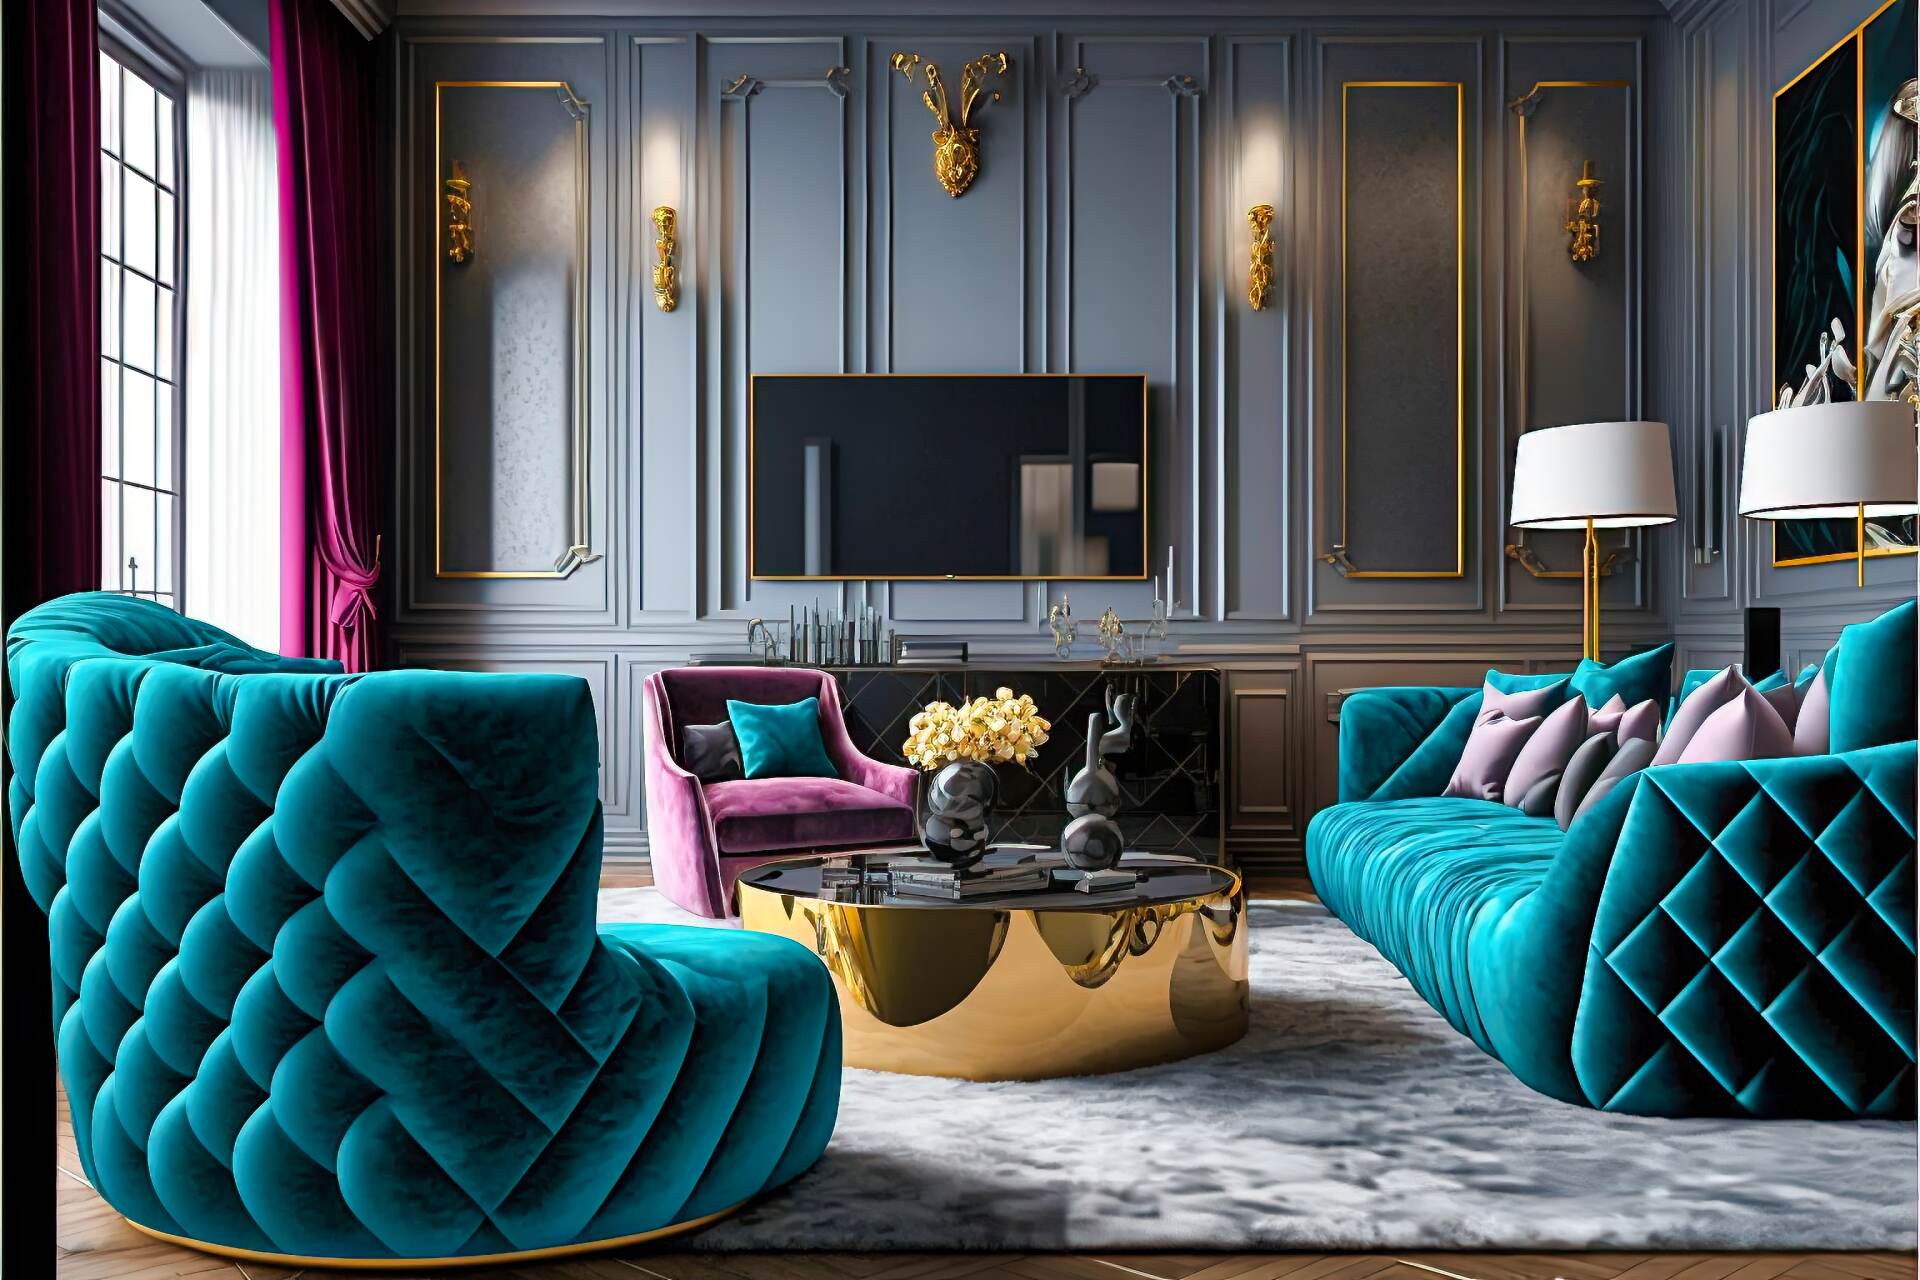 A Stunningly Luxurious Futuristic Living Room Made Up Of Deep Jewel Tones. The Center Of The Room Holds A Giant Flat-Screen Tv, With A Velvet-Tufted Wall Behind It. A Plush, Grey Armchair And A Velvet Sofa Provide Plenty Of Seating, With A Gold Coffee Table Completing The Look. A Richly Coloured Rug Adds Warmth And Texture. Gold Accents Throughout The Room Adds A Touch Of Glamour.